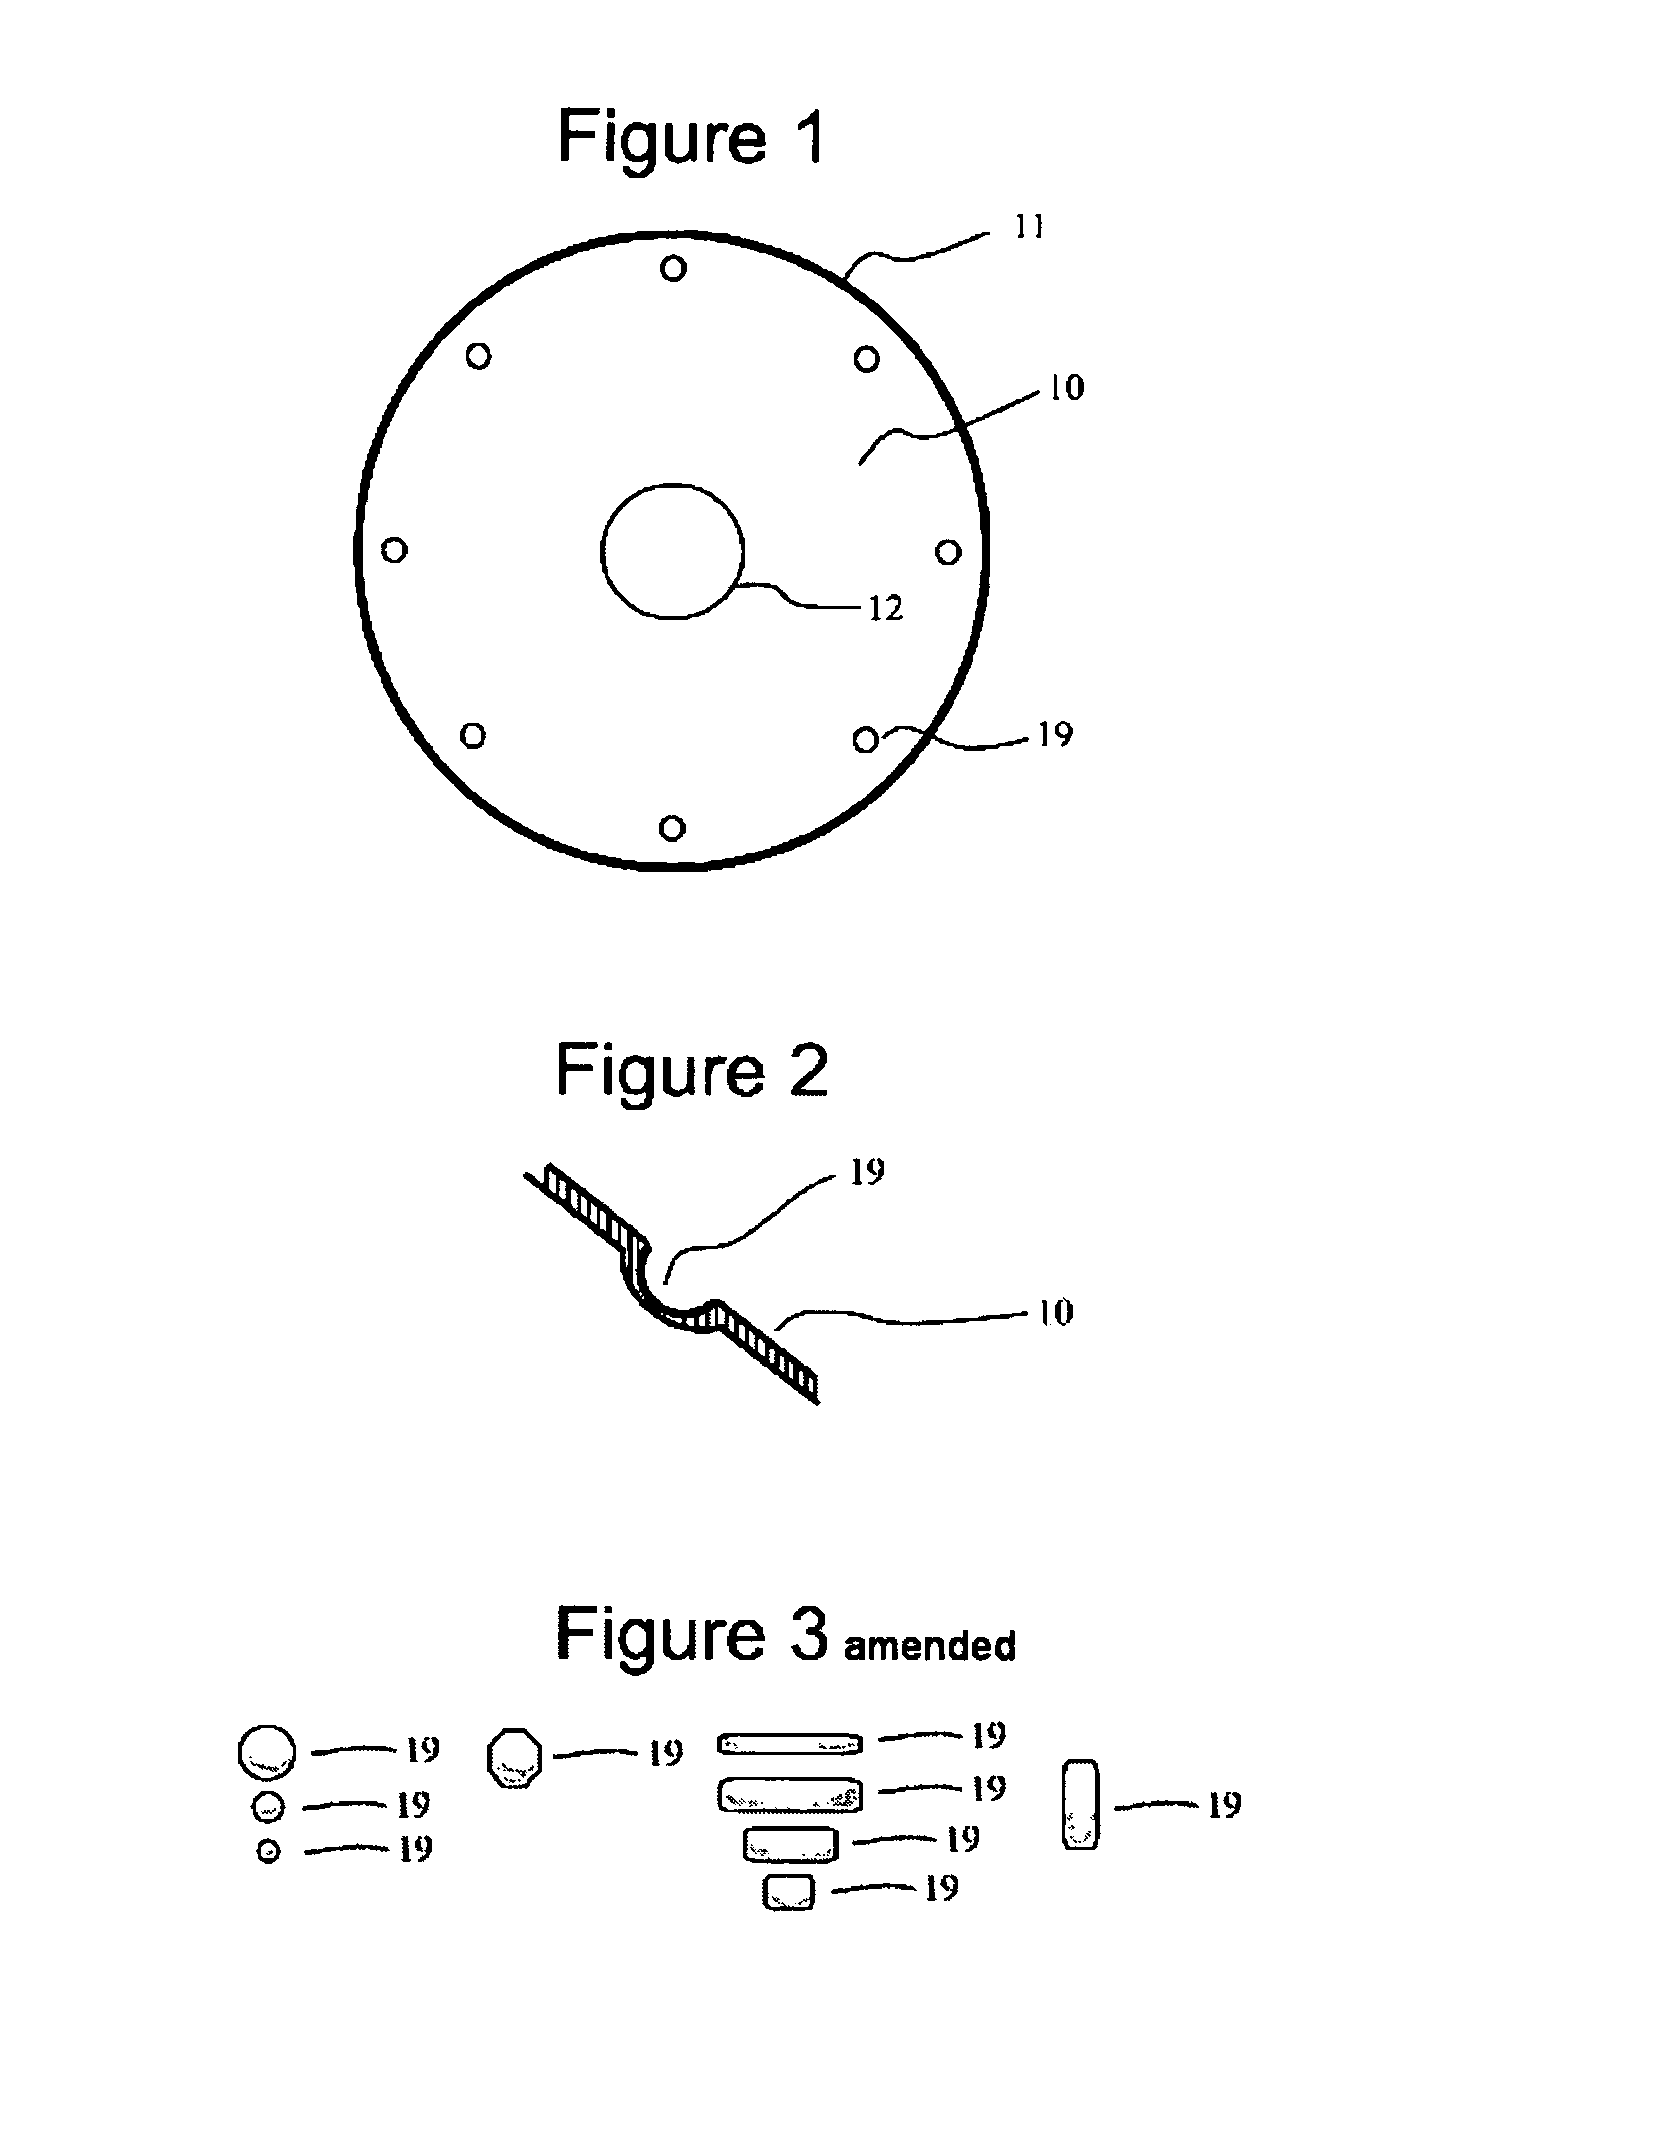 Method and apparatus for controlling material vibration modes in polymer and paper high performance speaker diaphragms